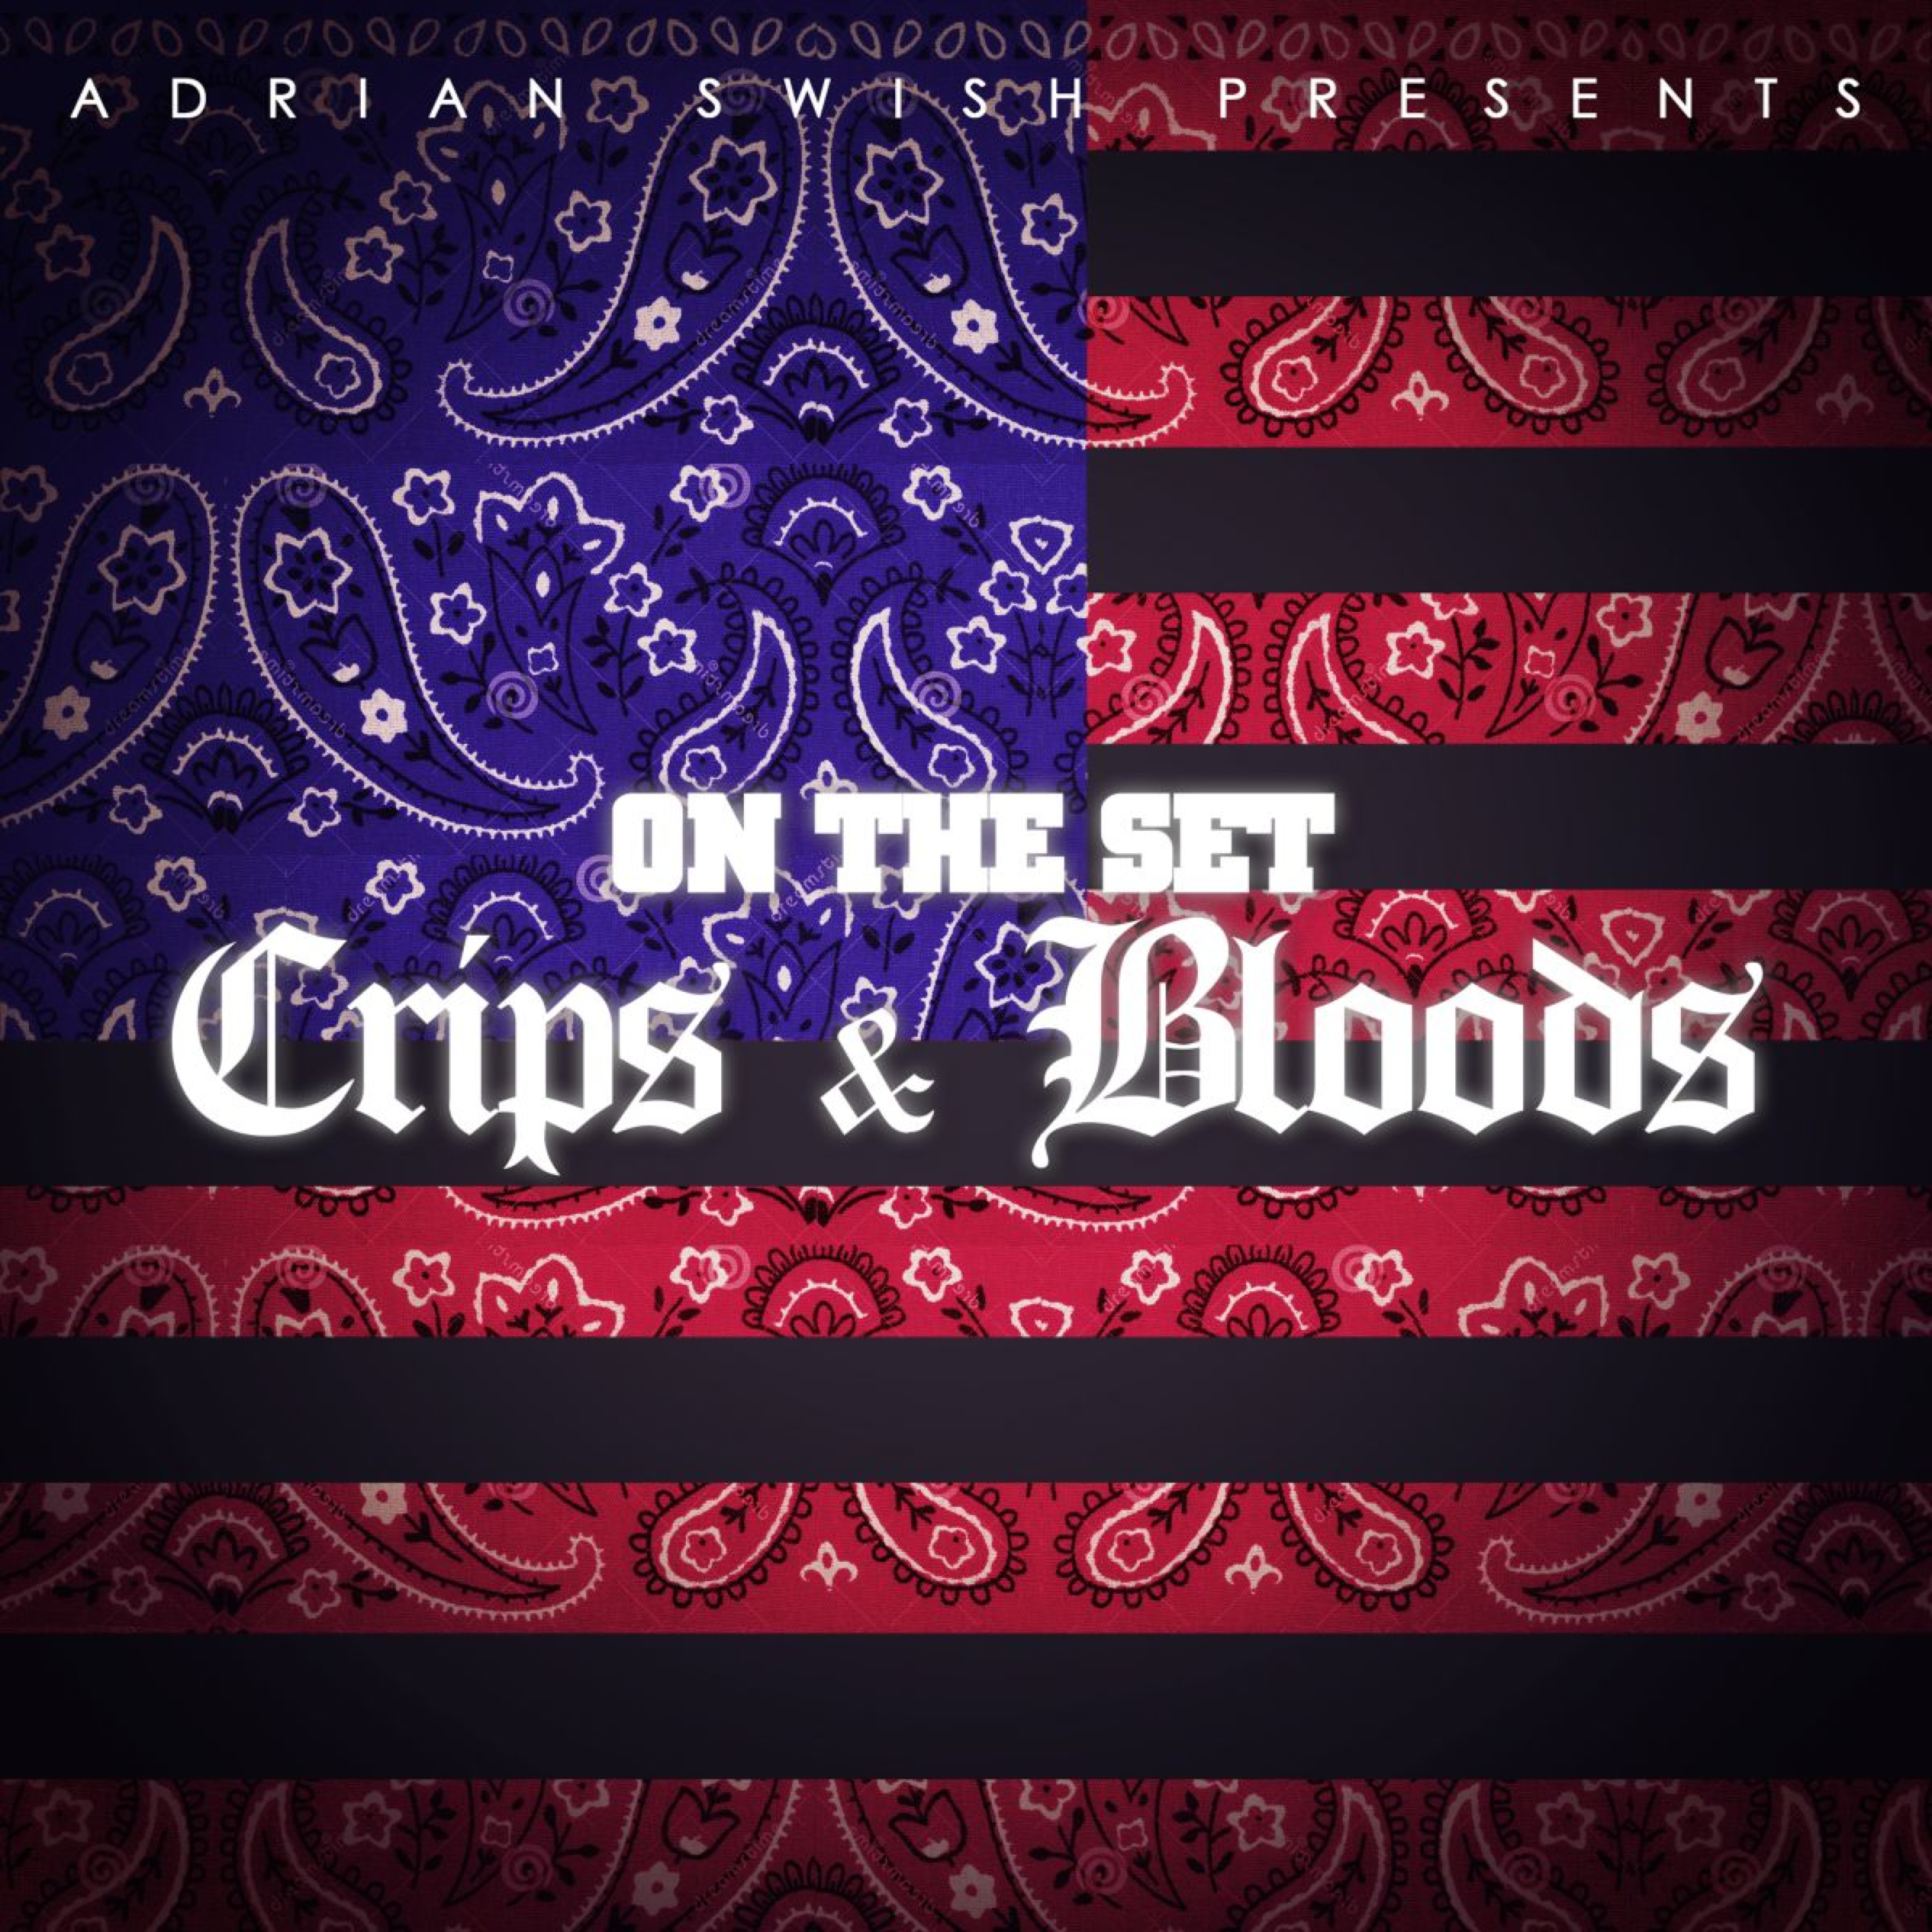 Adrian Swish Presents: On The Set: Crips & Bloods